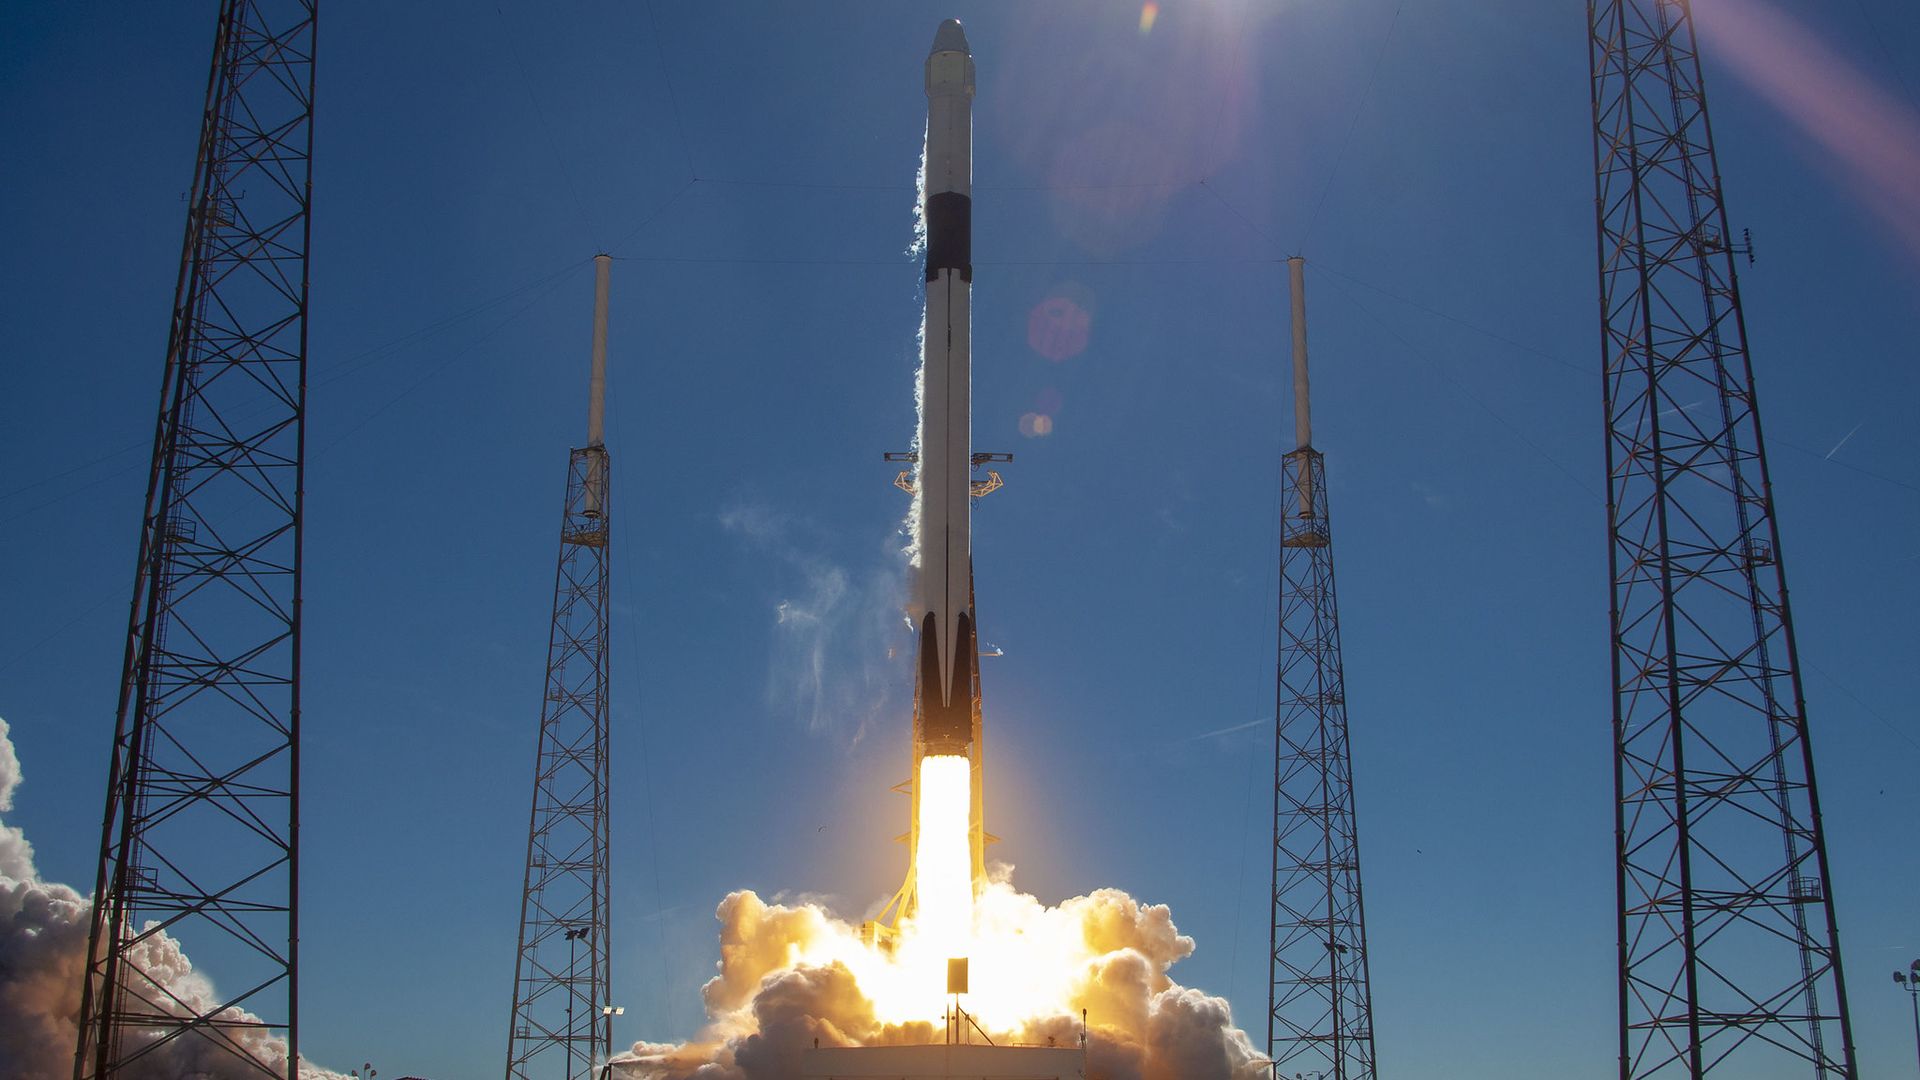 A Falcon 9 rocket launching on a blue day